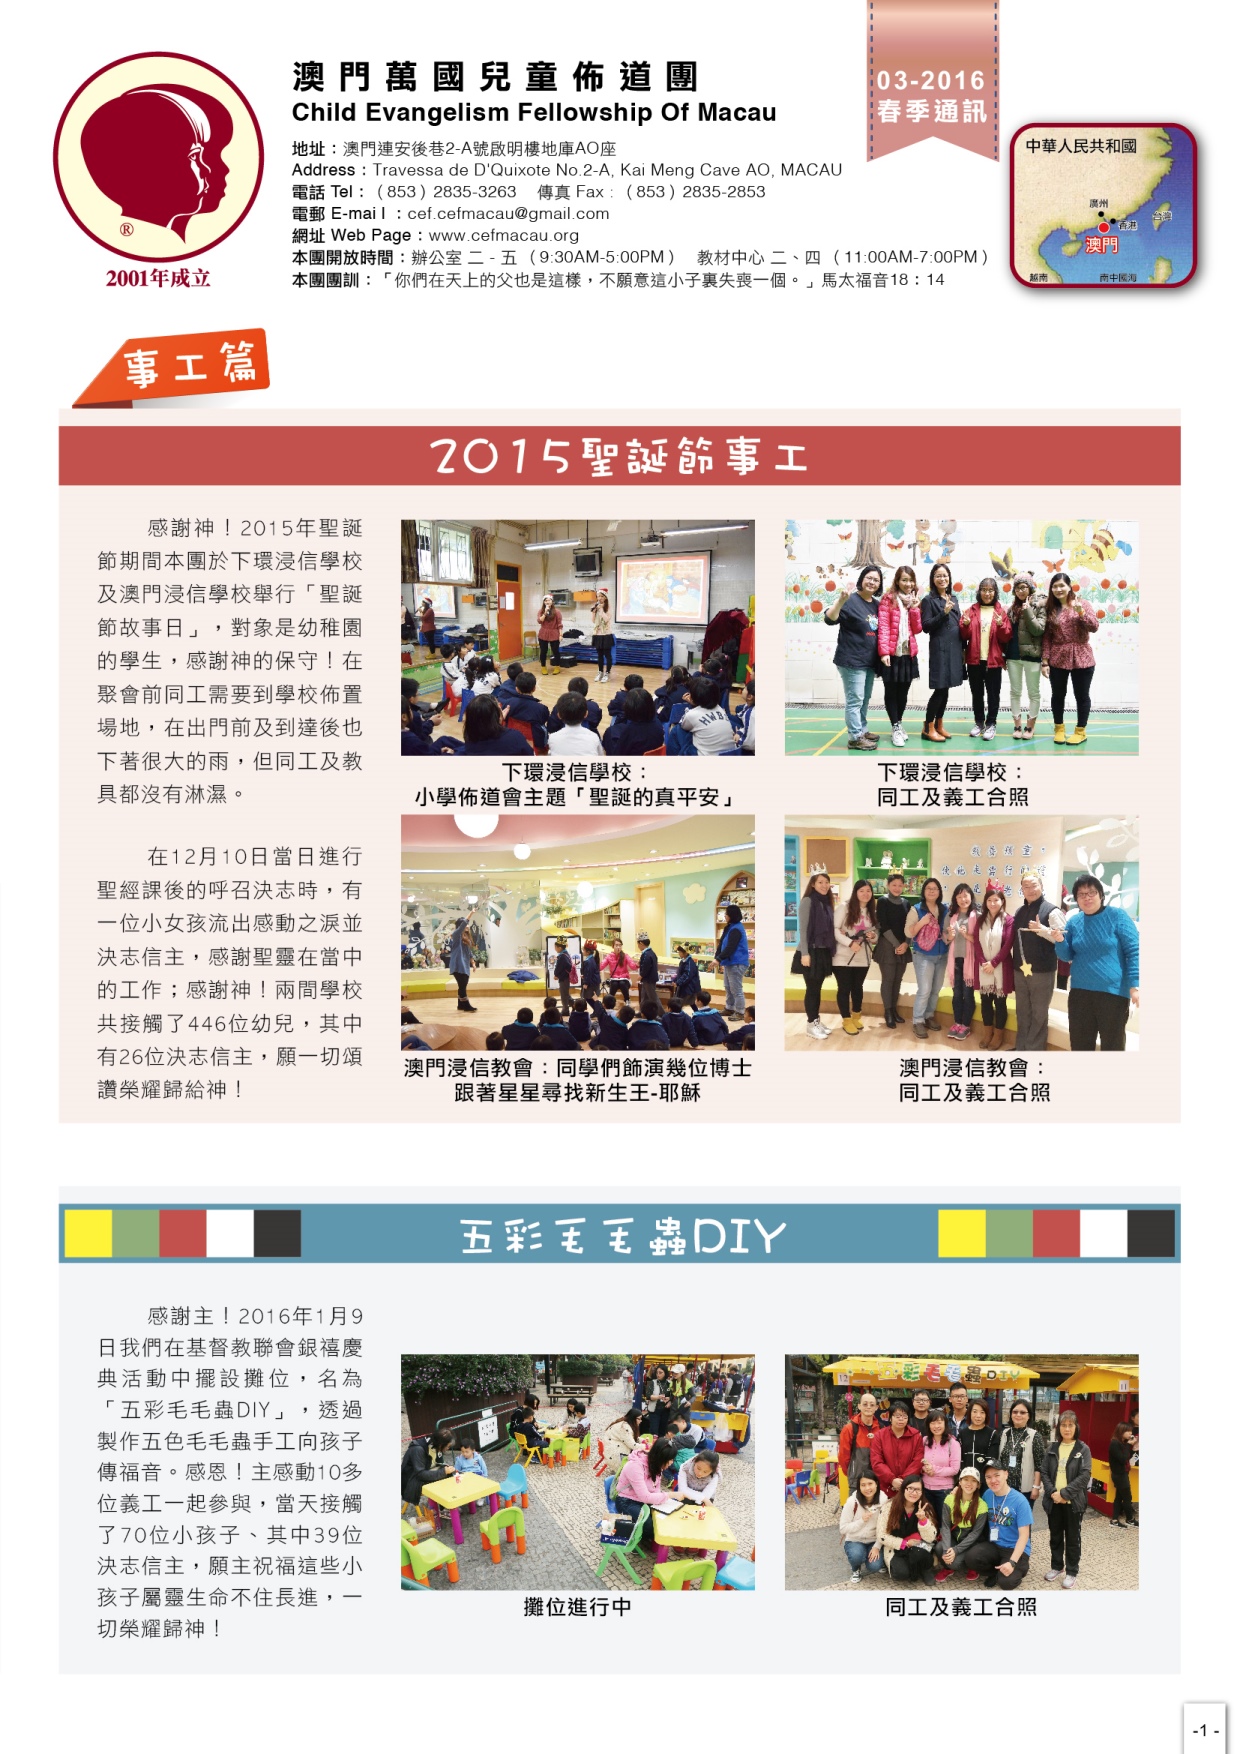 2015/06 page 1